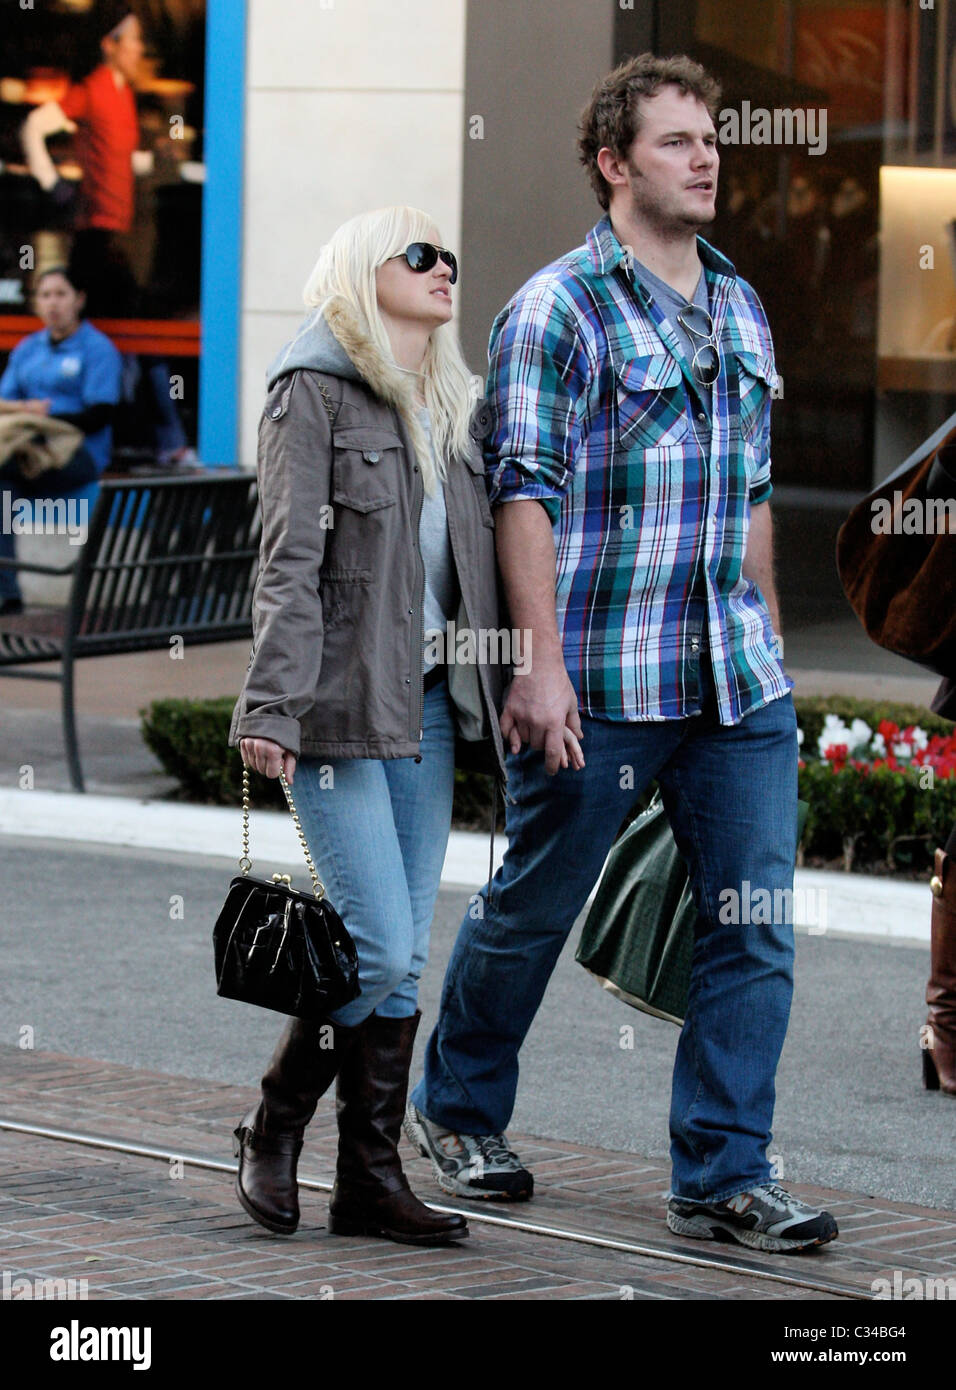 The House Bunny' star Anna Faris out shopping in Hollywood with 'Bride Wars' actor Chris Pratt Los Angeles, California - Stock Photo